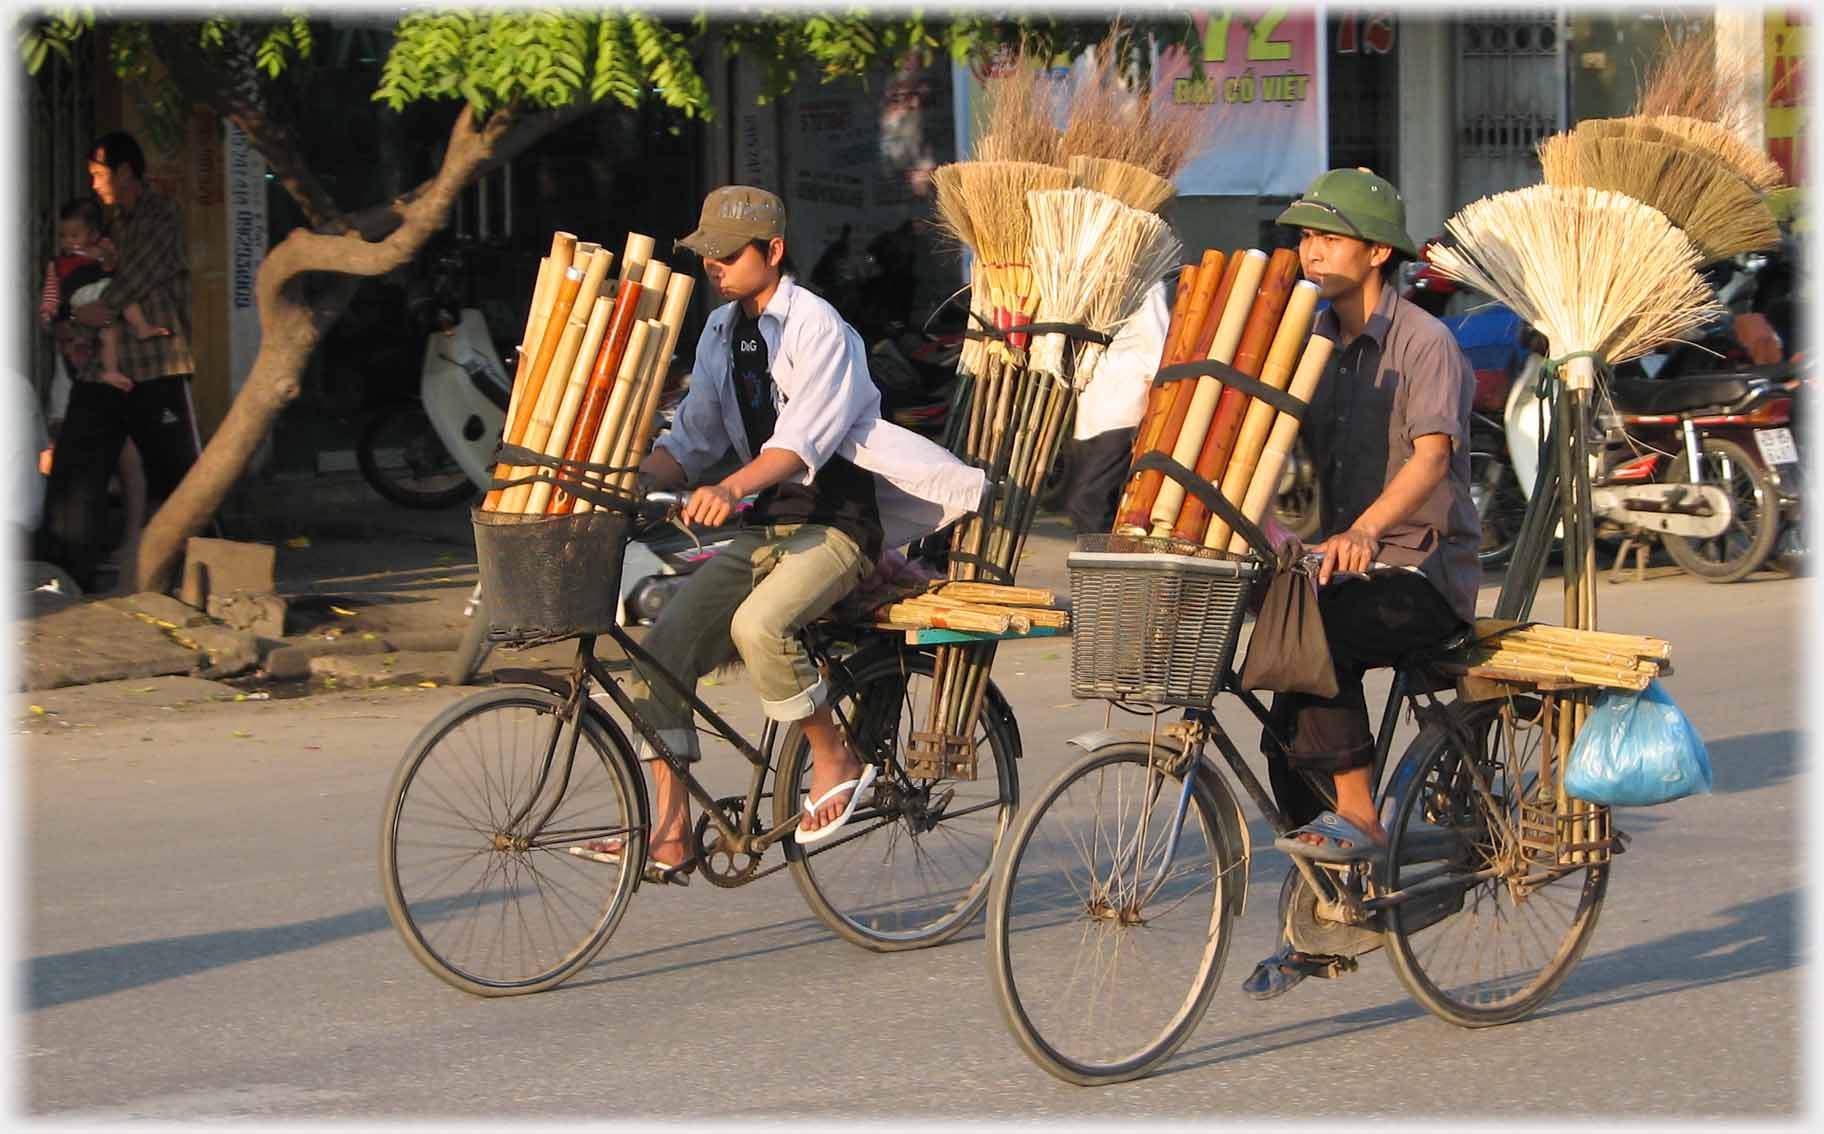 Two vendors cycling together with brushes behind and bamboo pipes in front.